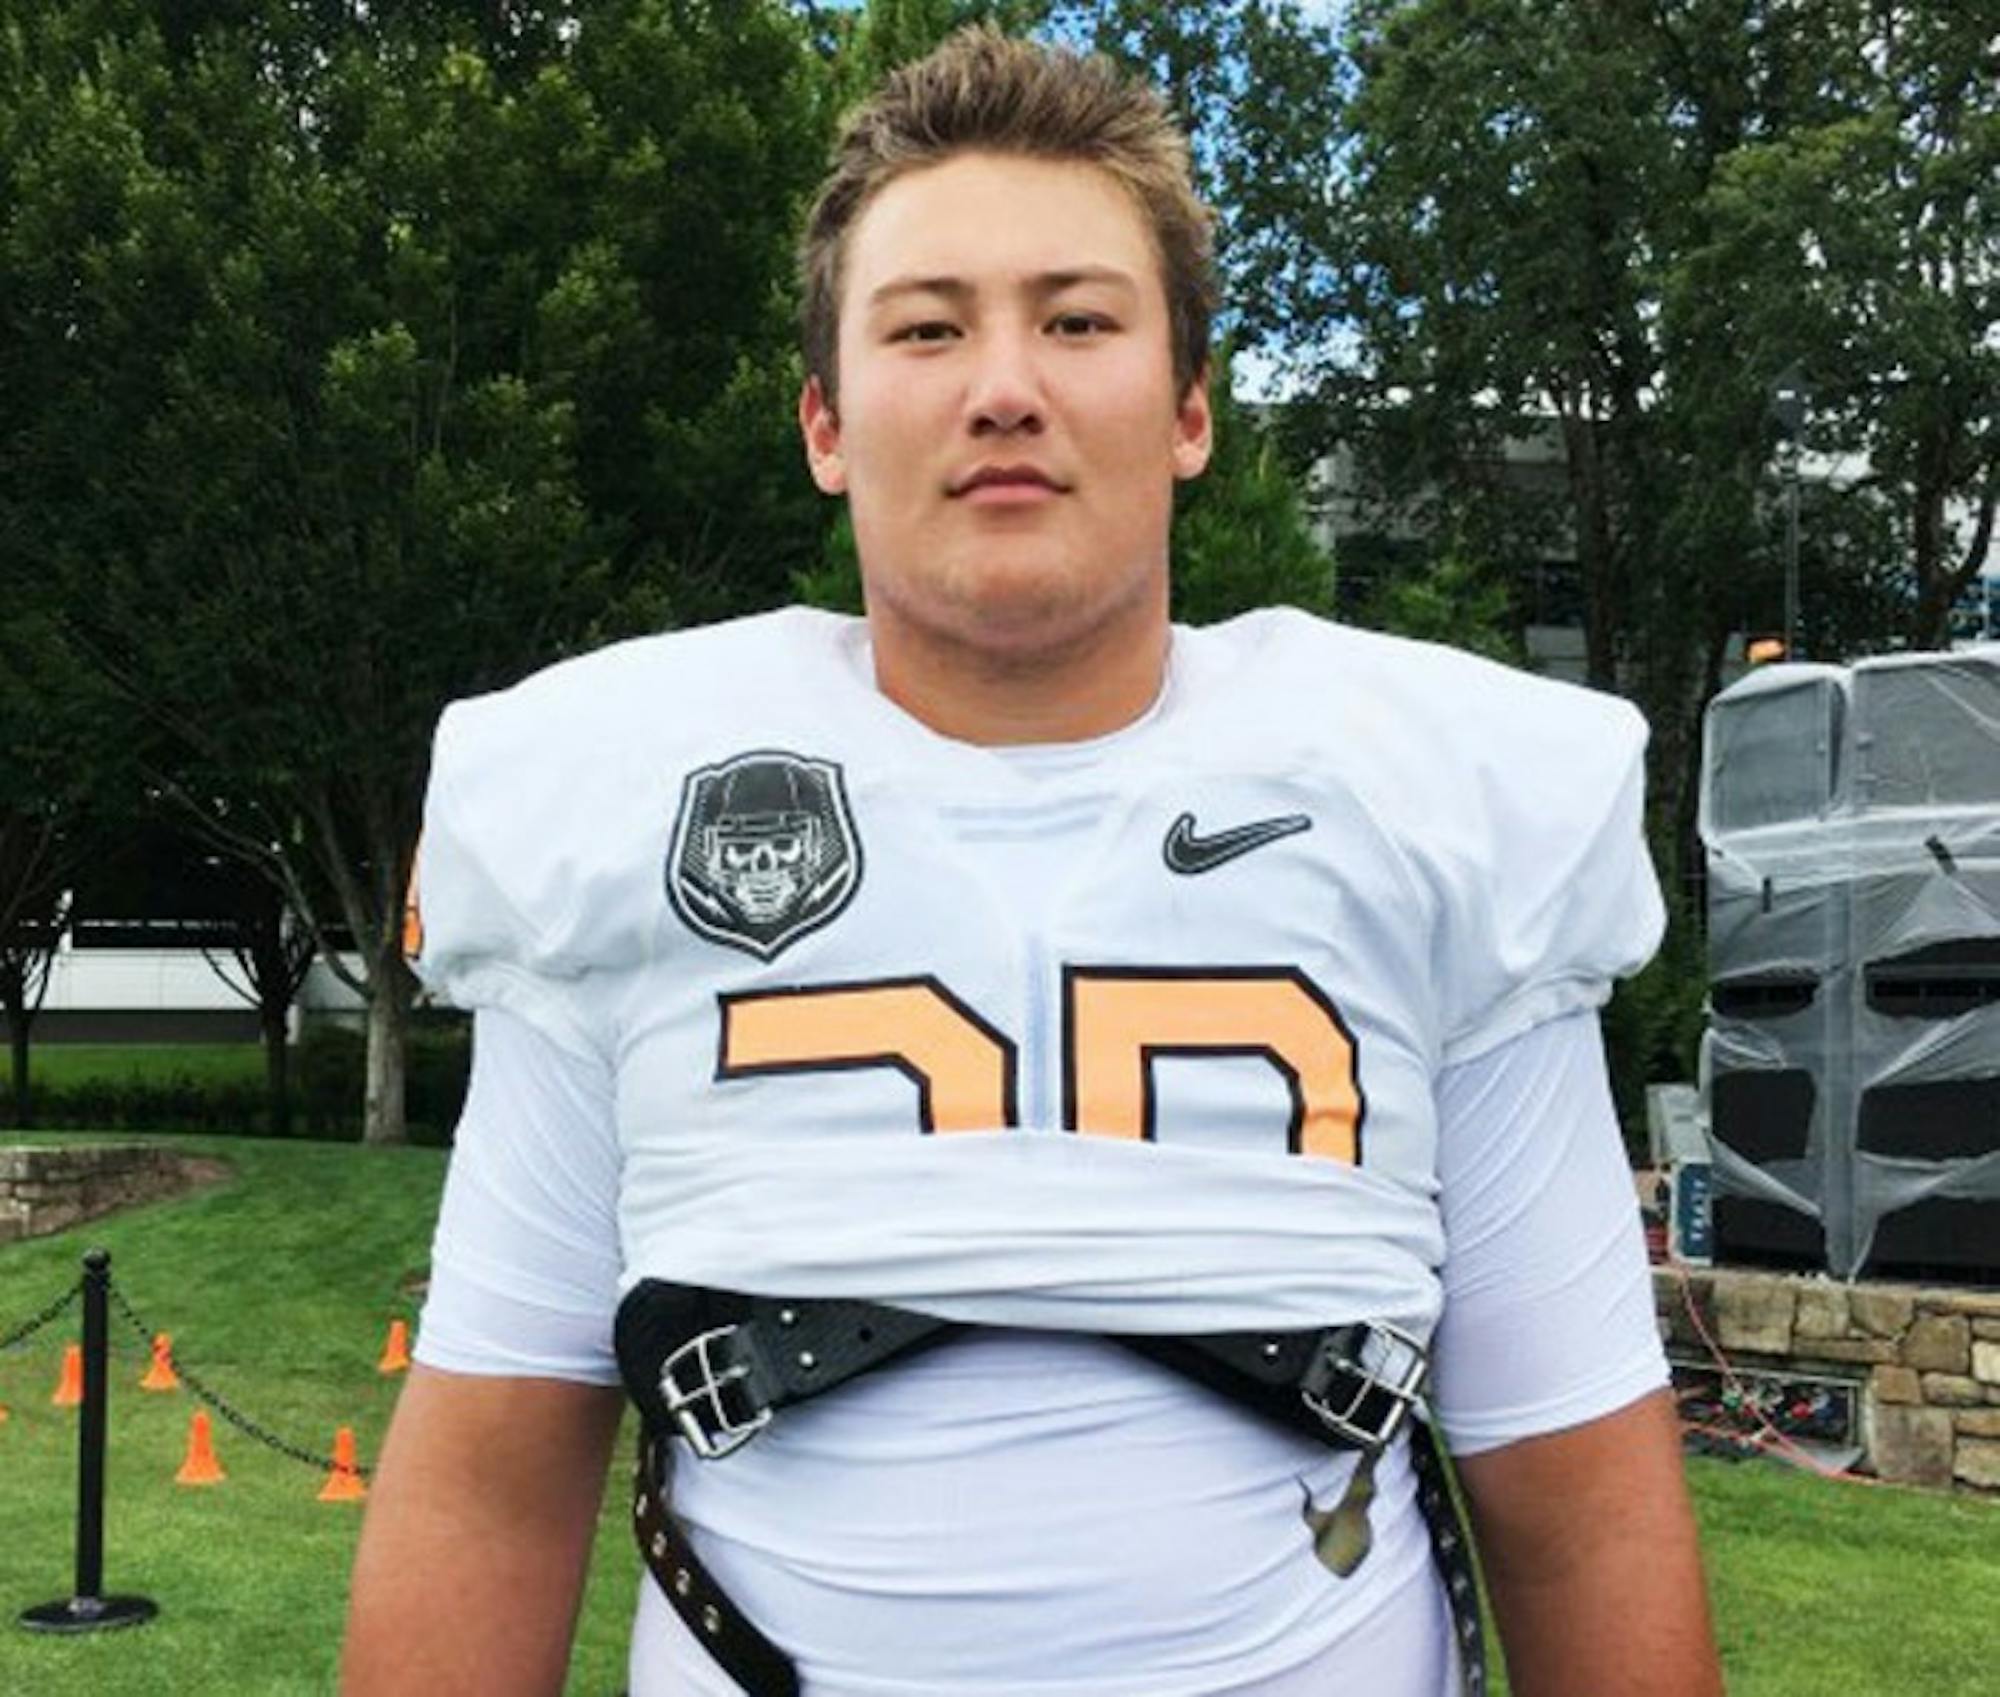 5-star offensive lineman Foster Sarell will visit Notre Dame this weekend.